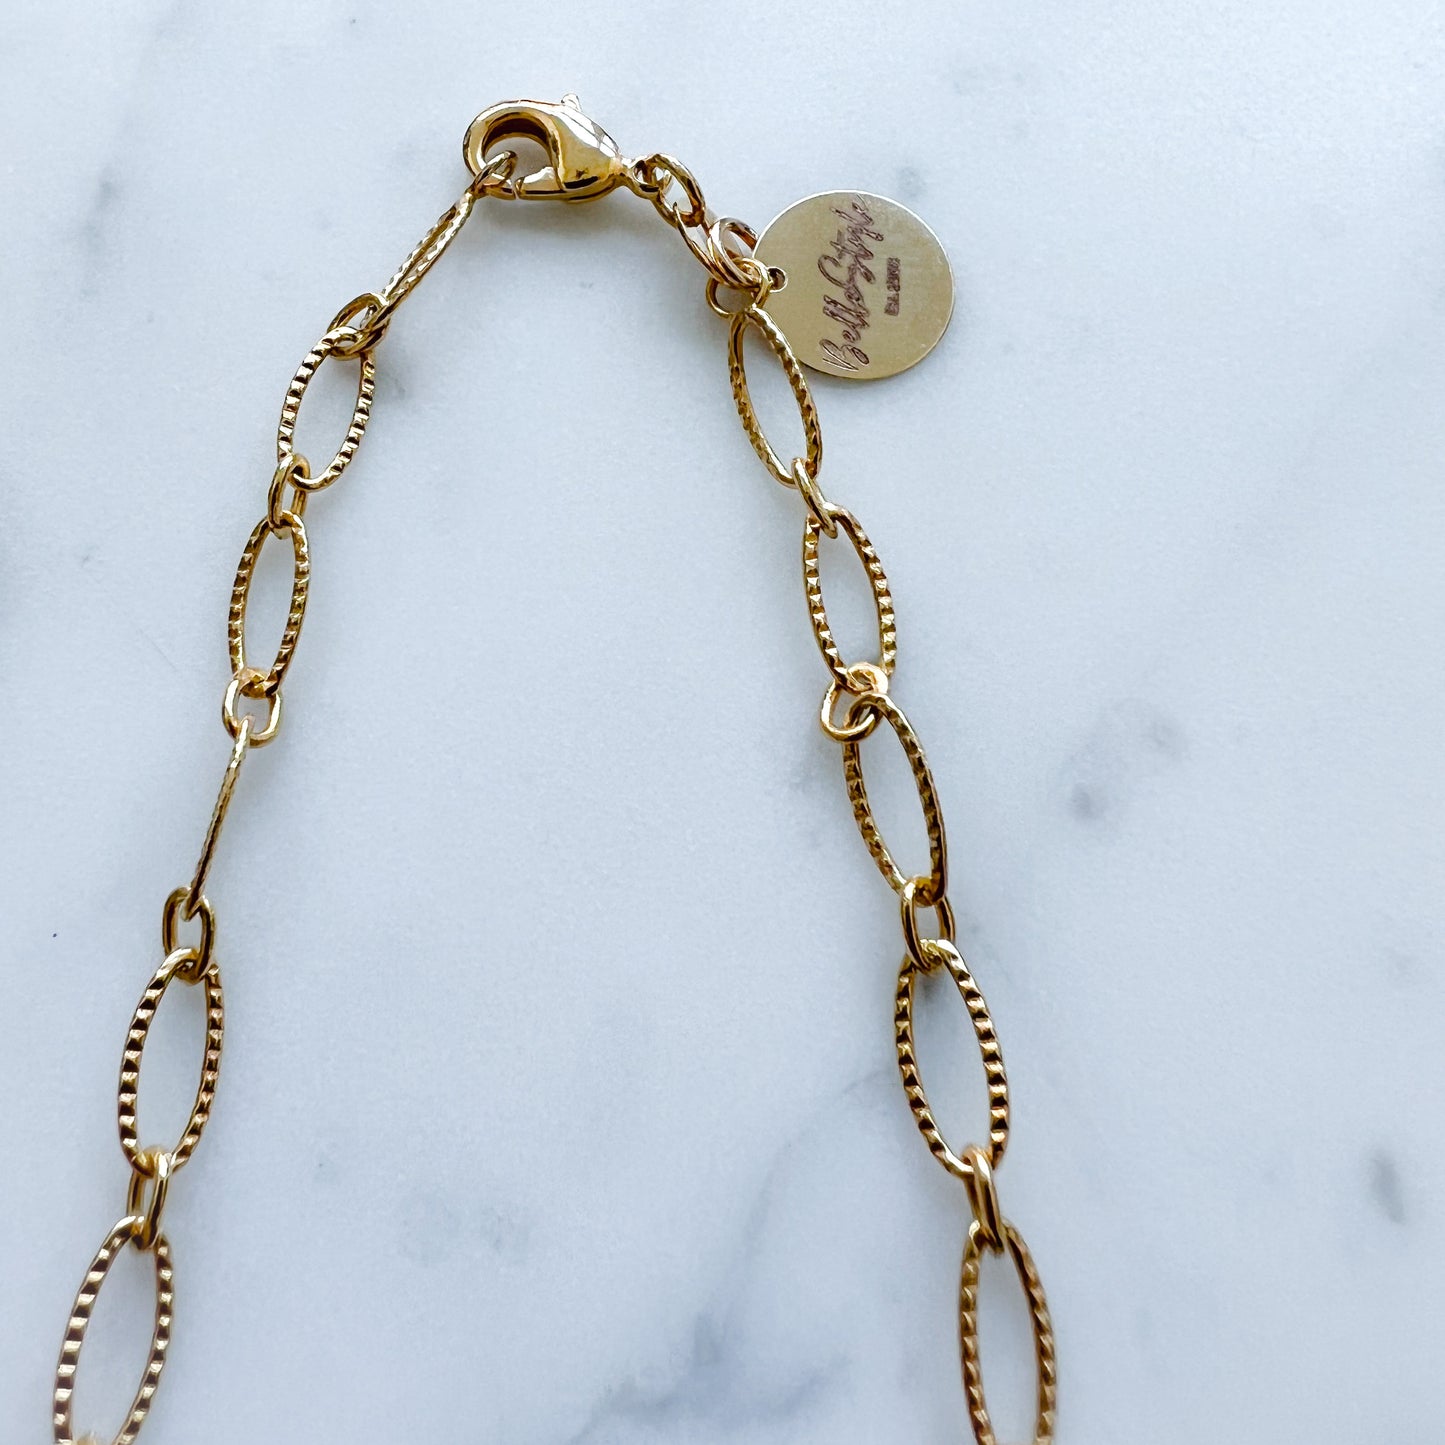 Wallace Gold Textured Chain Necklace - BelleStyle